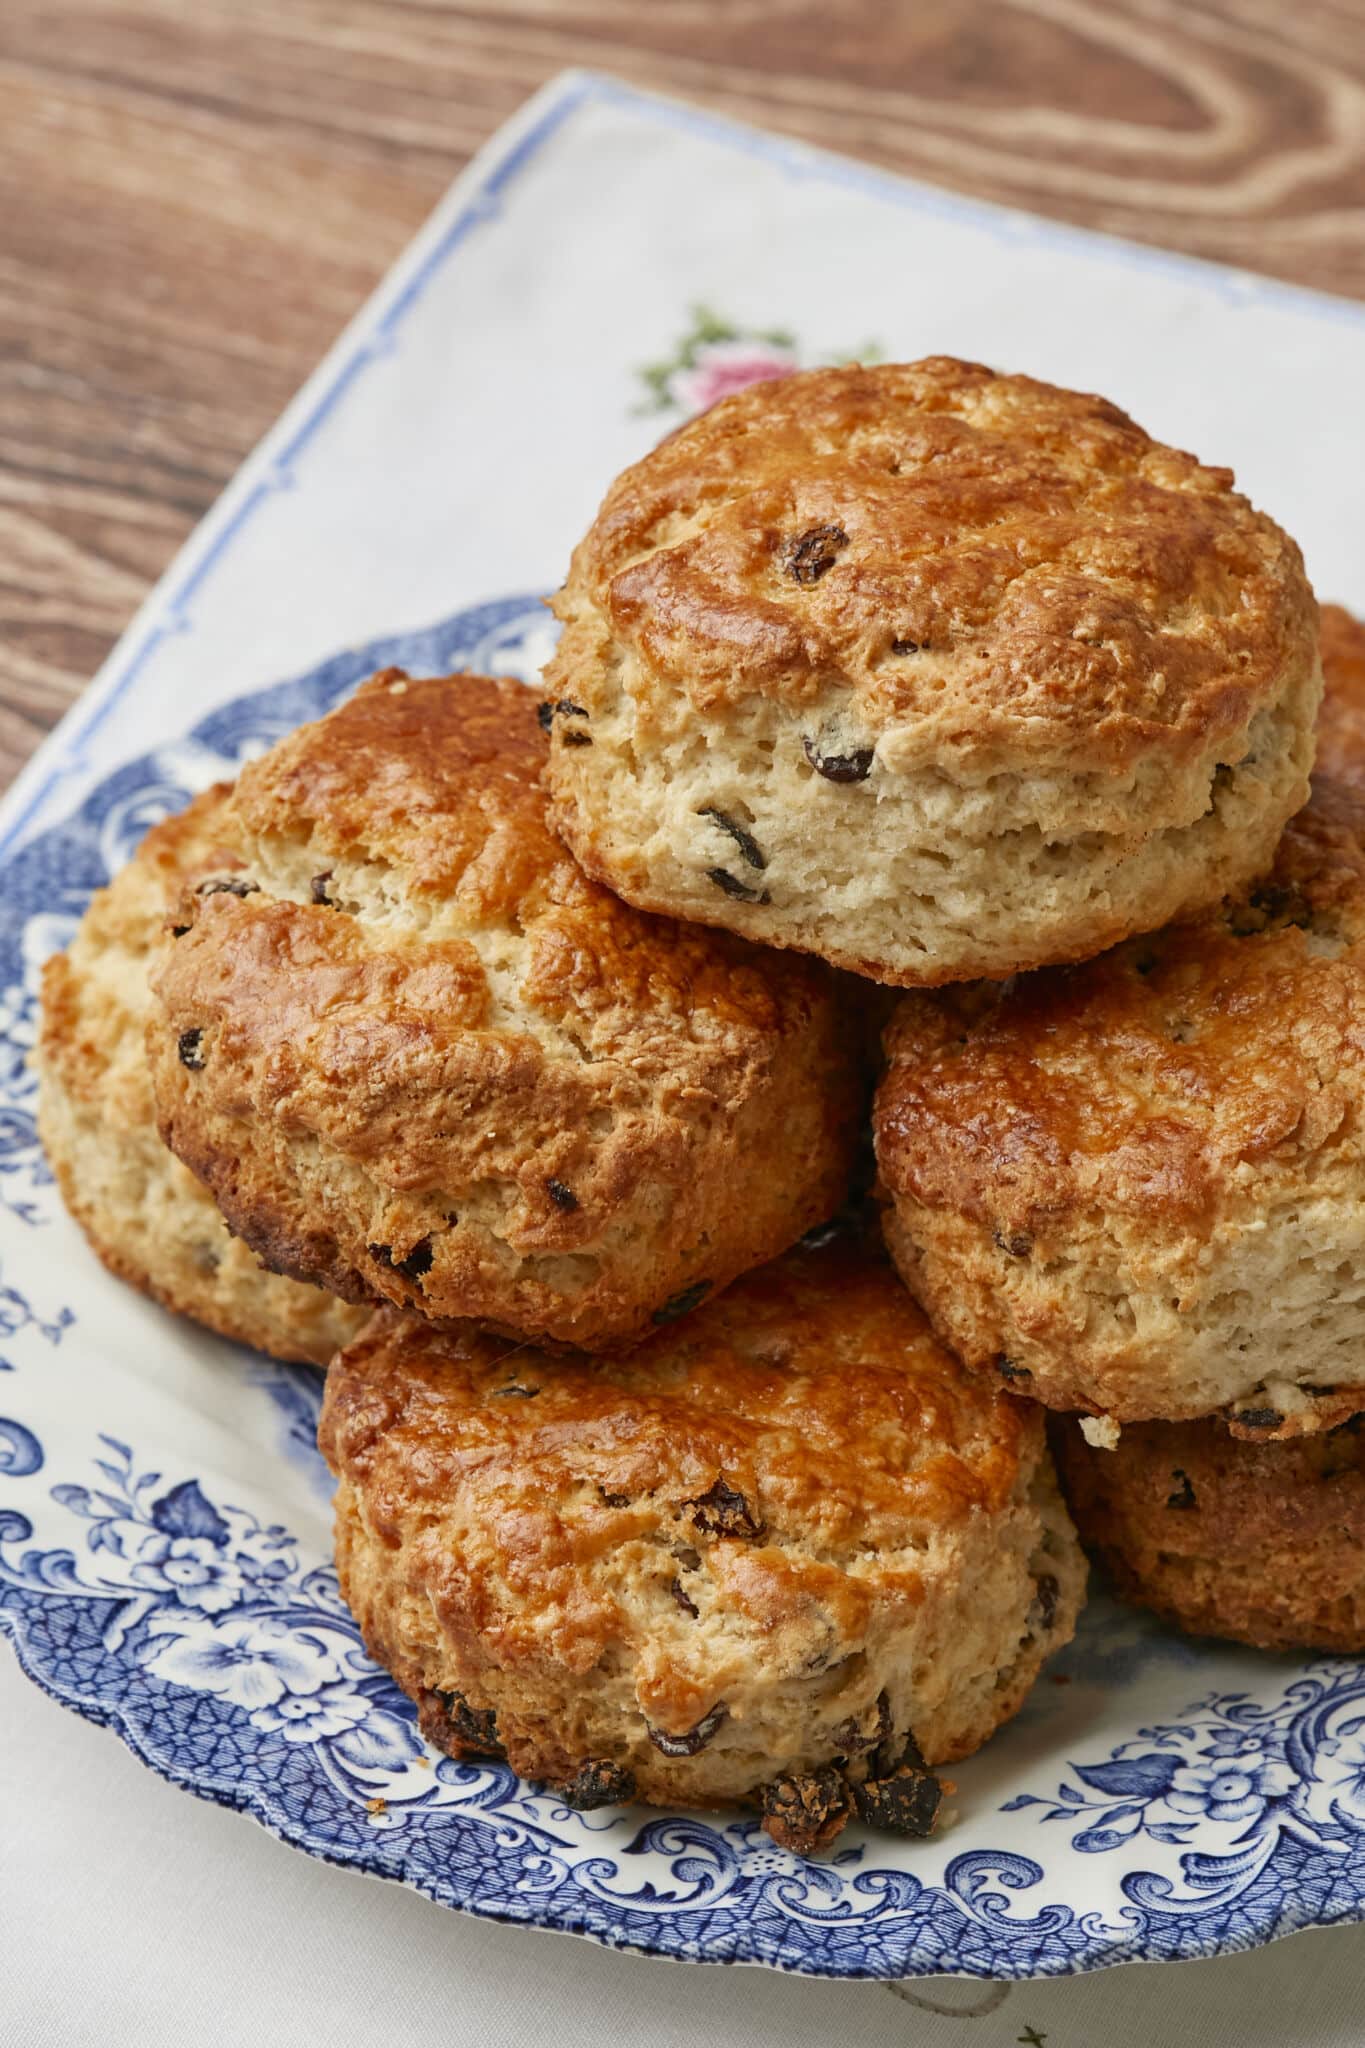 Gemma's Best-ever Irish Scones are golden and crispy on the outside. They're packed with raisins.